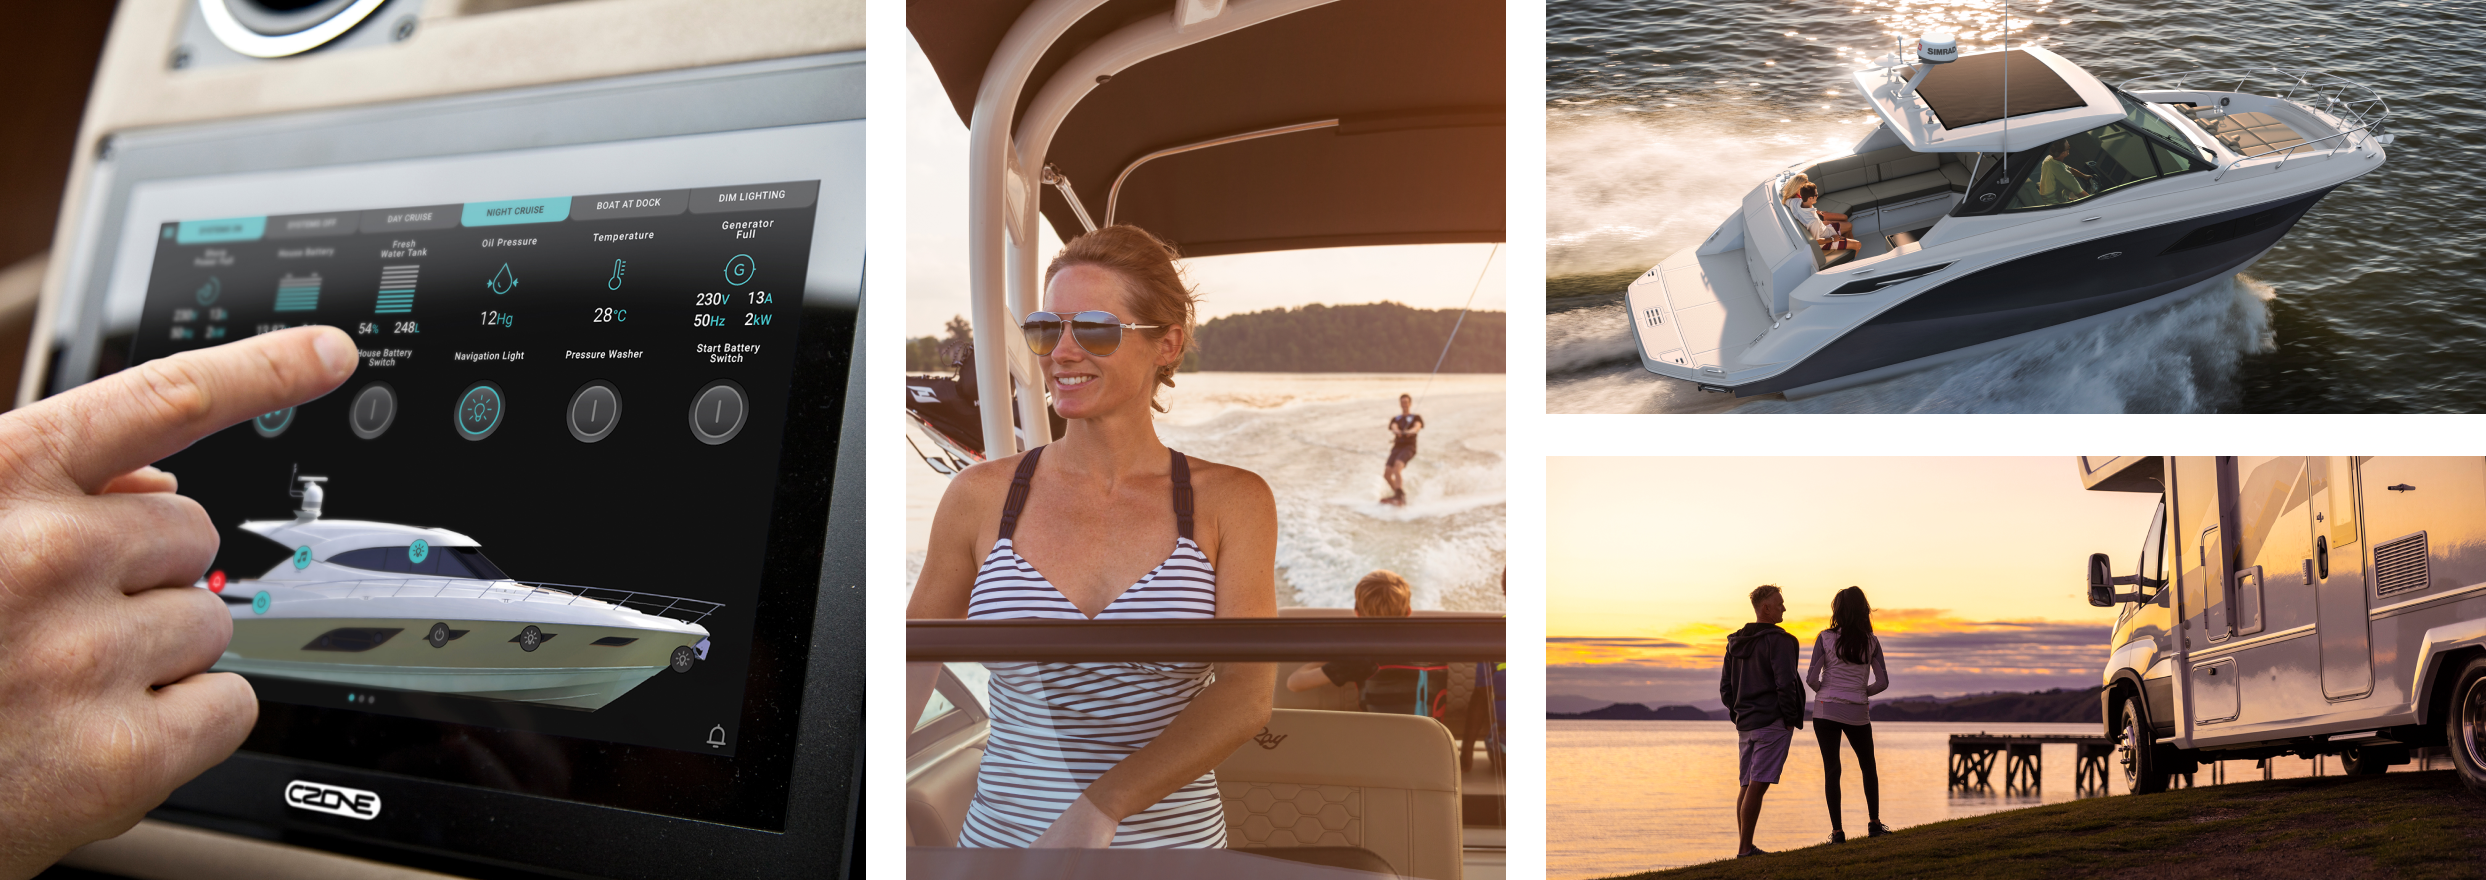 A person using a CZone® system. A woman smiling while on a boat.A boat on the water.A couple walking on the beach next to an RV.